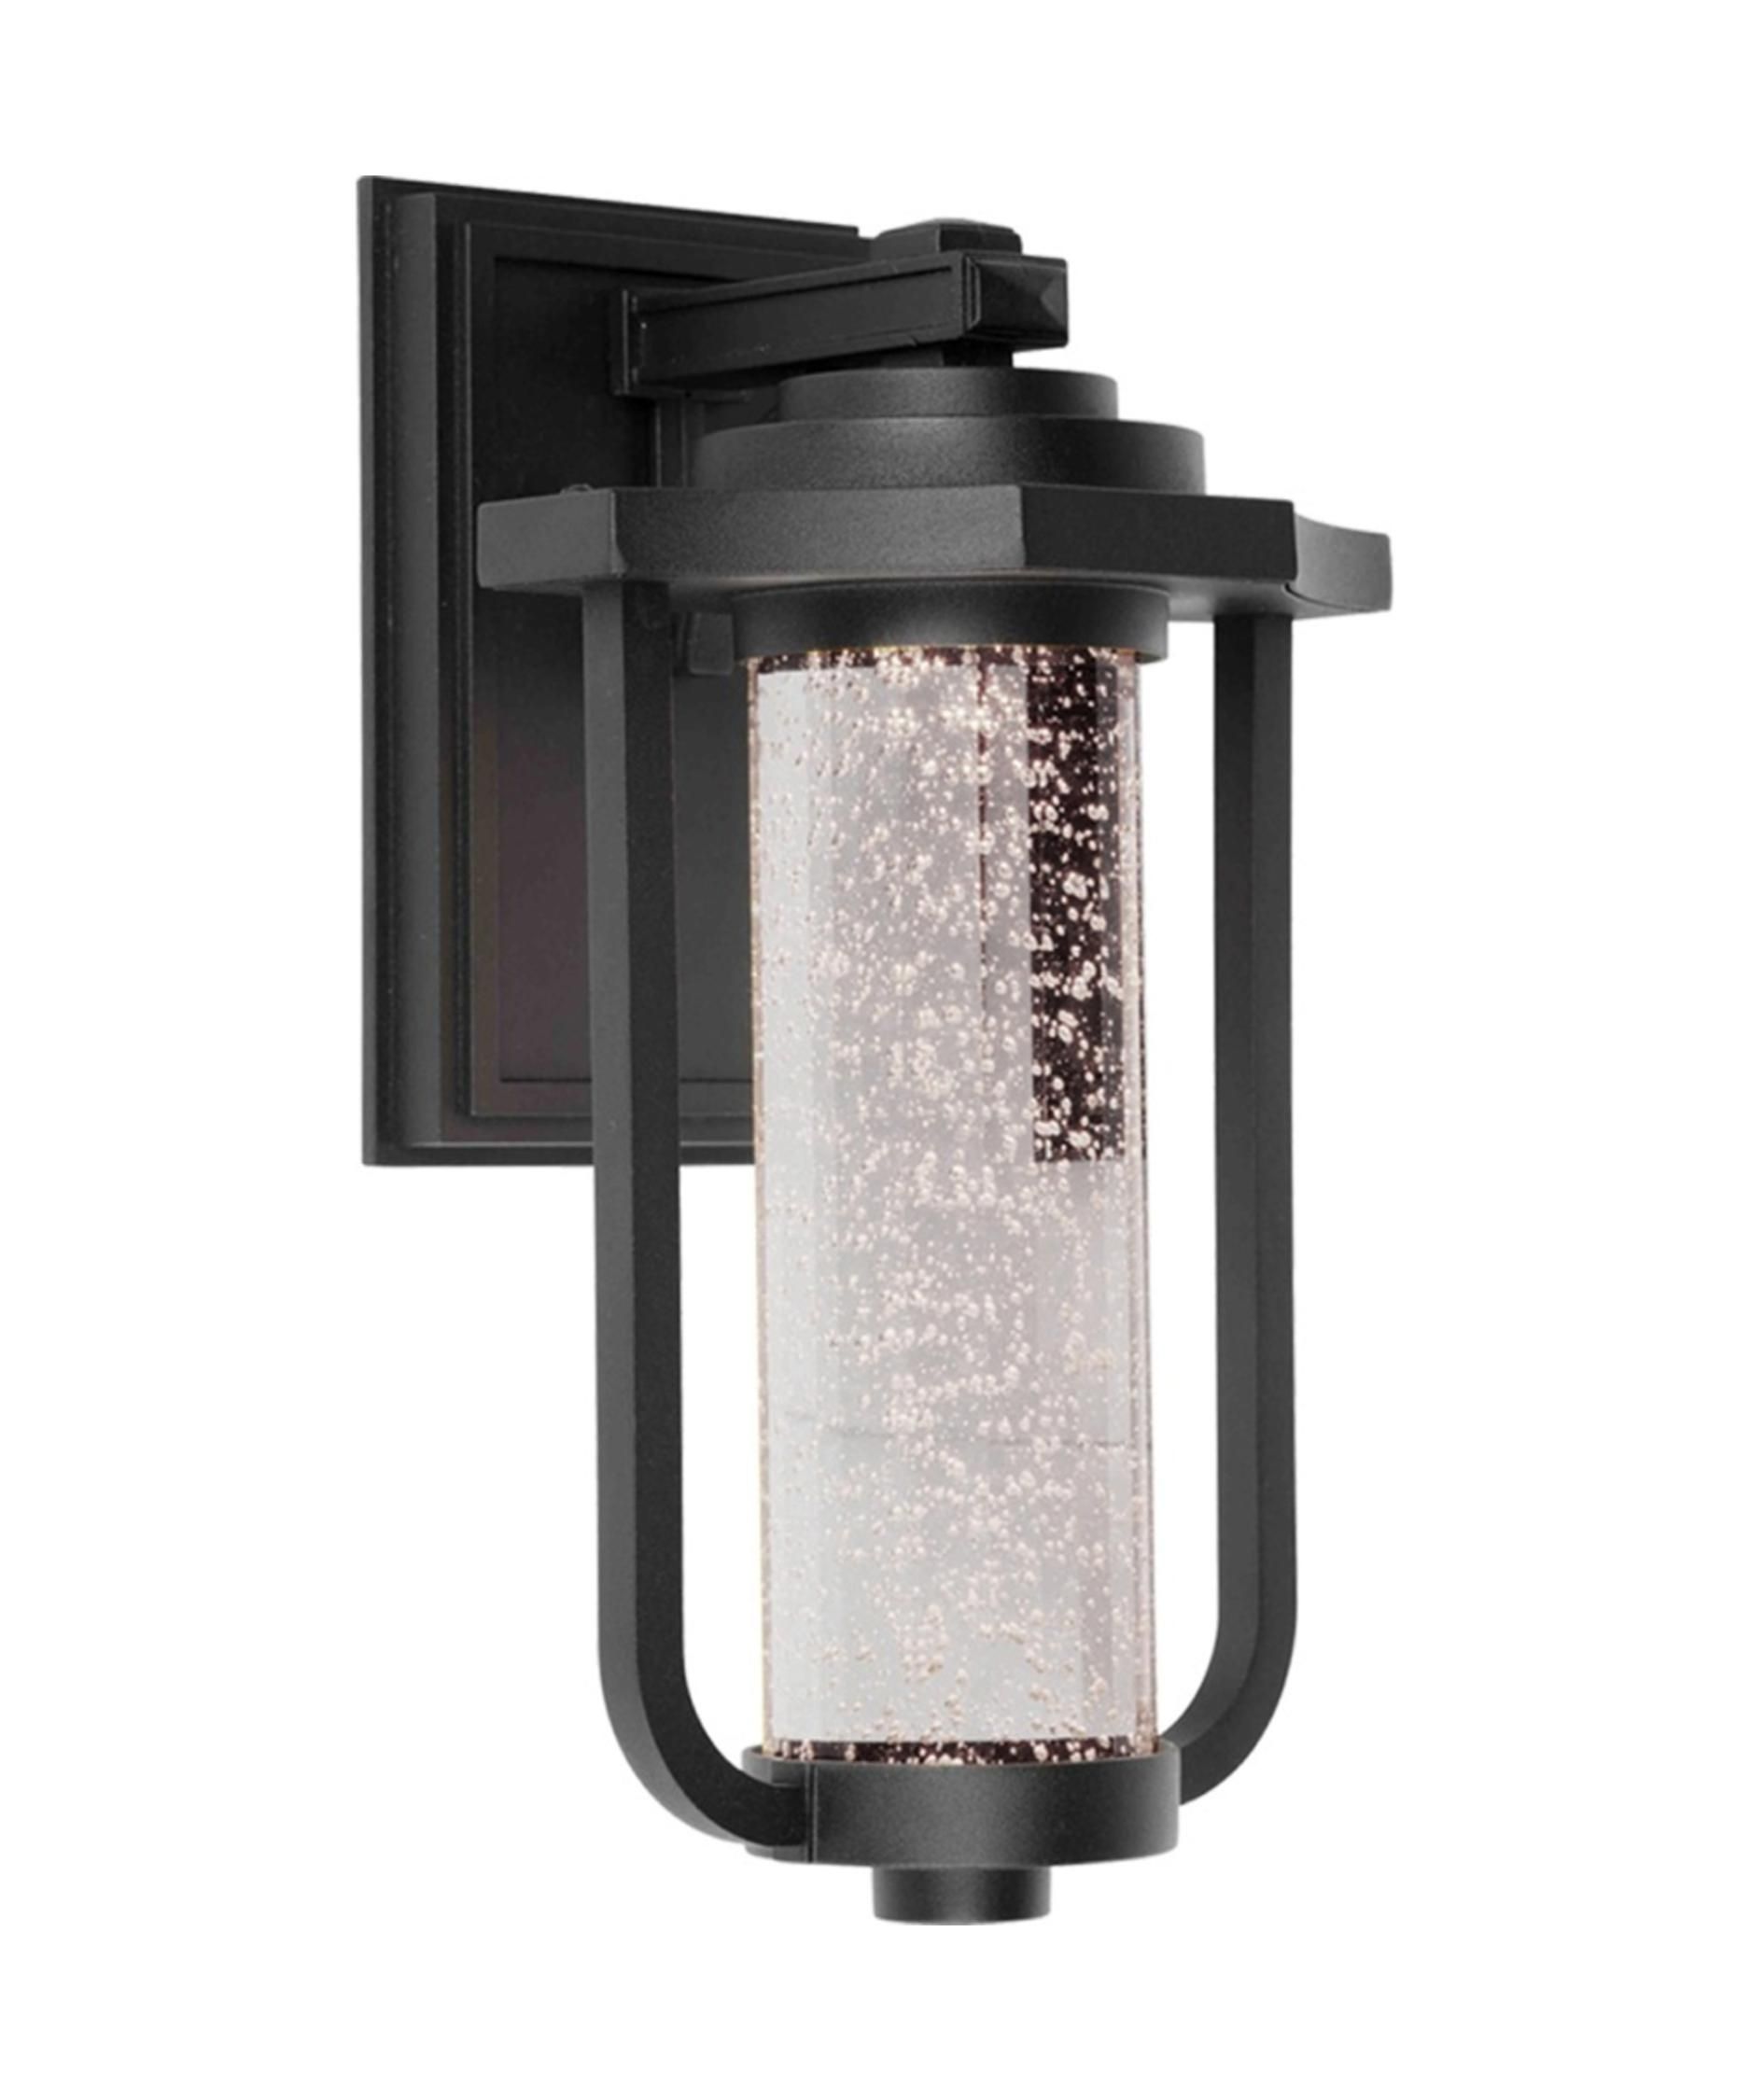 Marvellous Outdoor Wall Light Fixtures Large Tube Of Glass Material Throughout Outdoor Wall Sconce Lighting Fixtures (Photo 6 of 15)